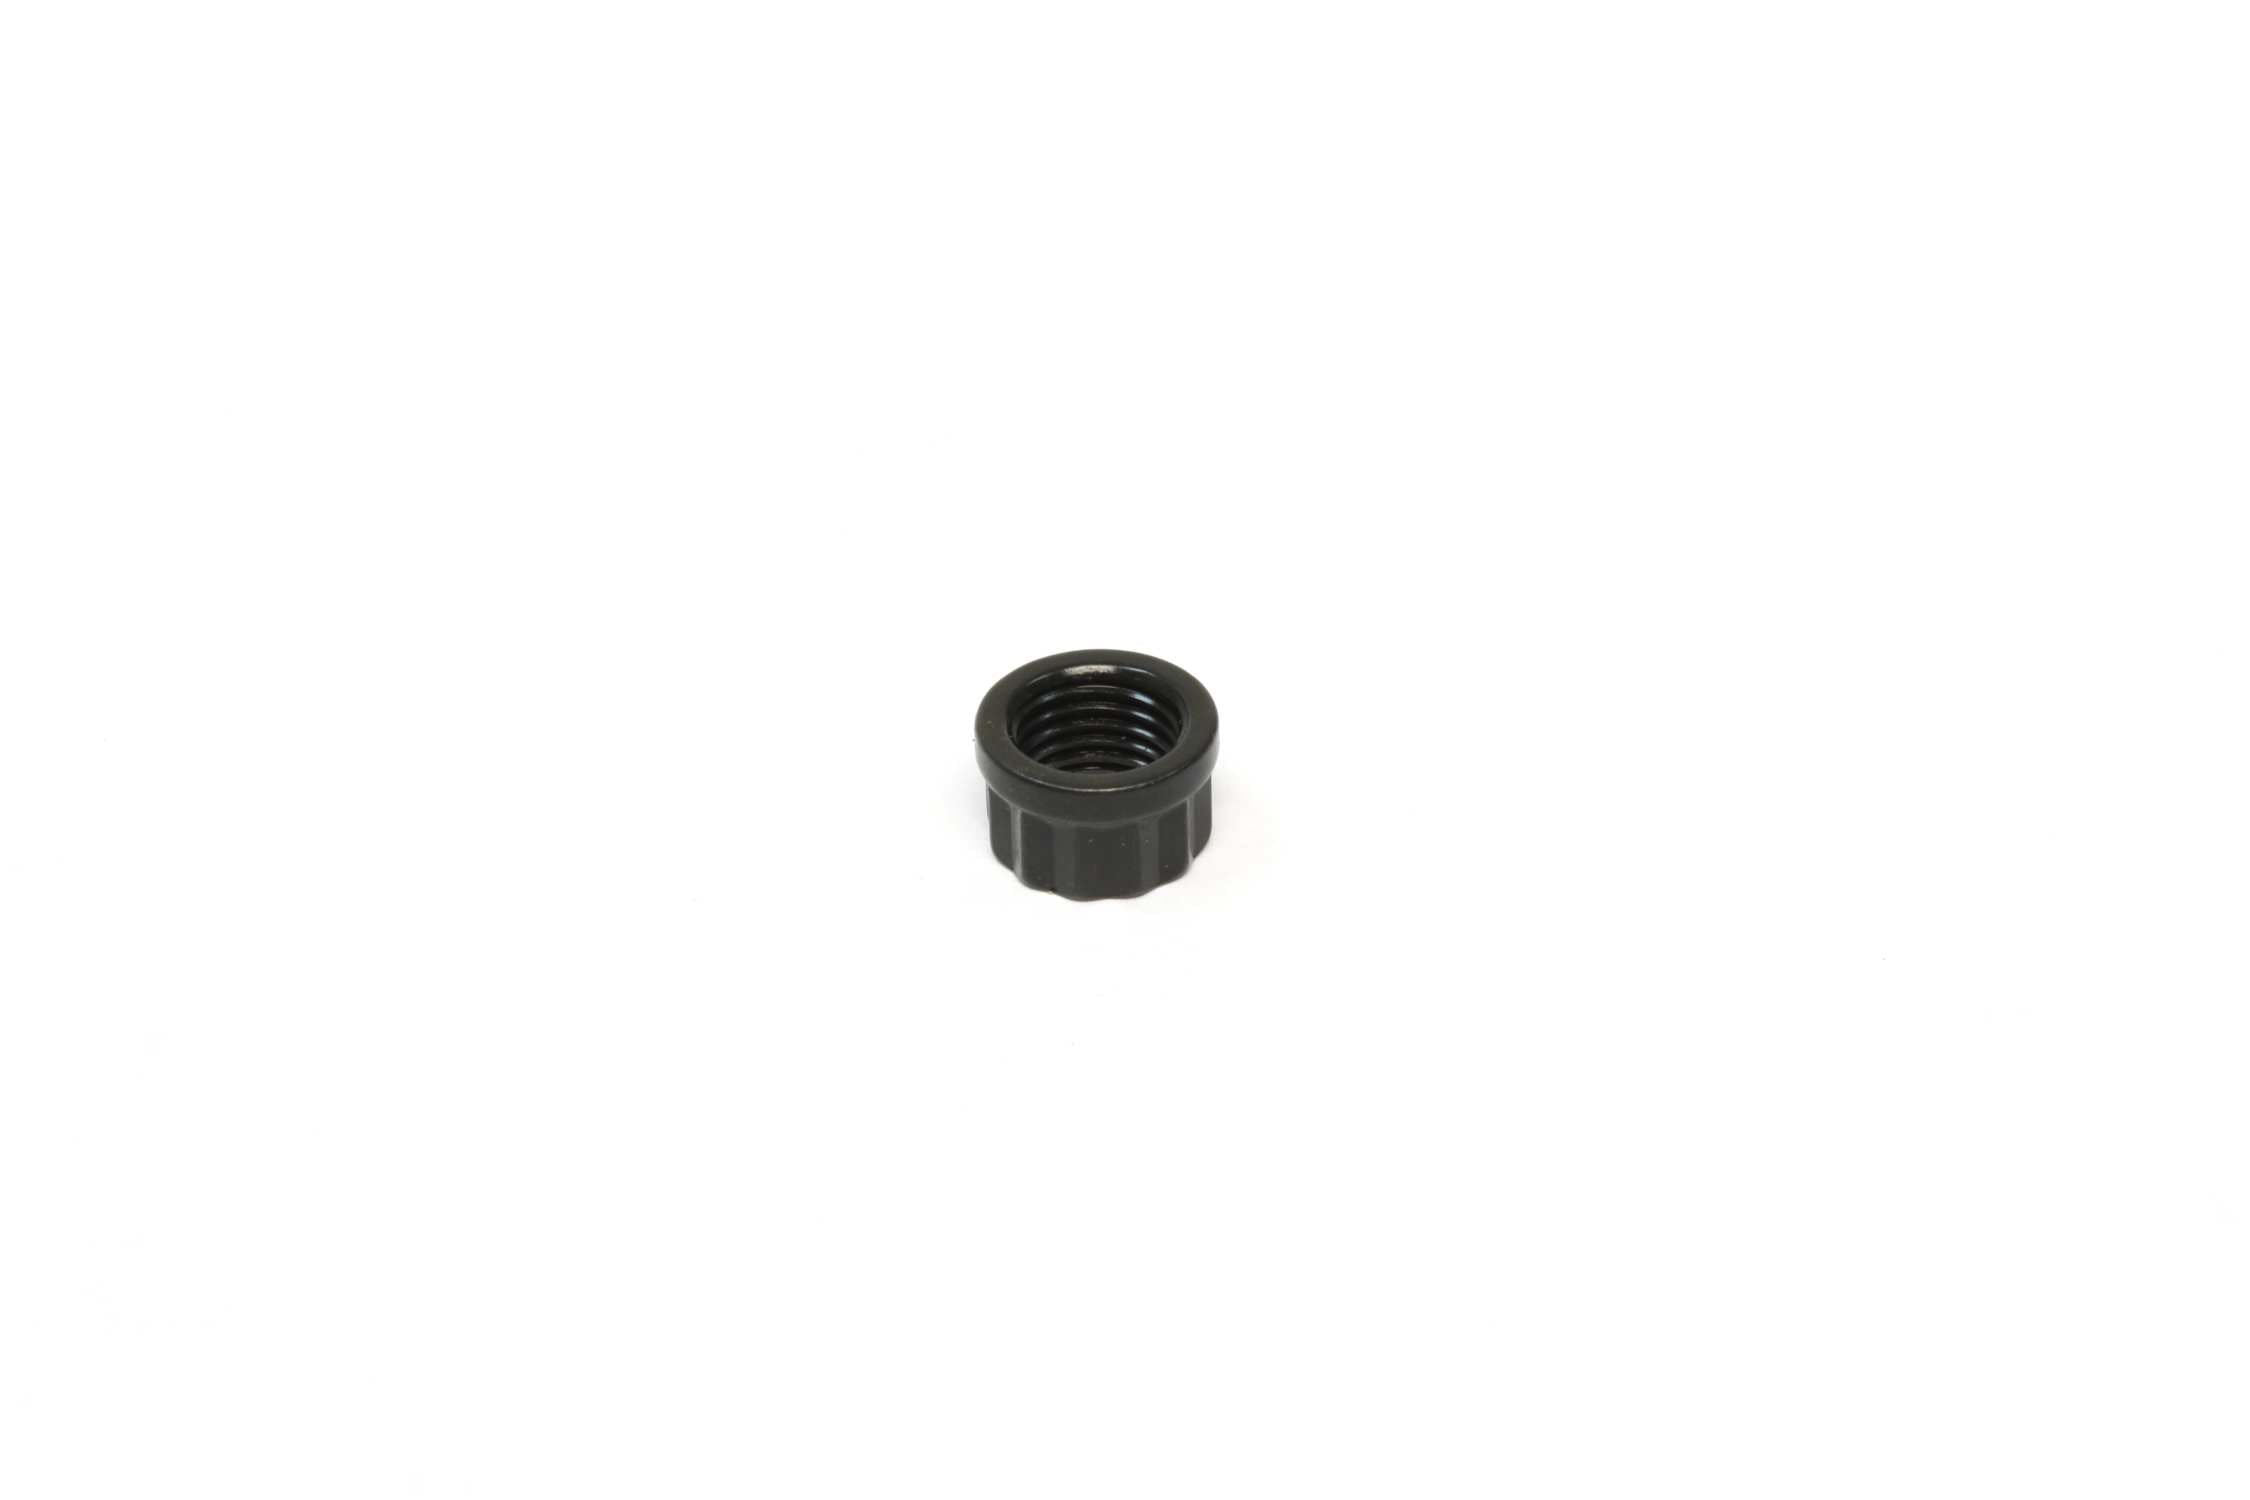 Competition Cams 1321N-1 Chrysler Shaft Rockers Replacement Nut